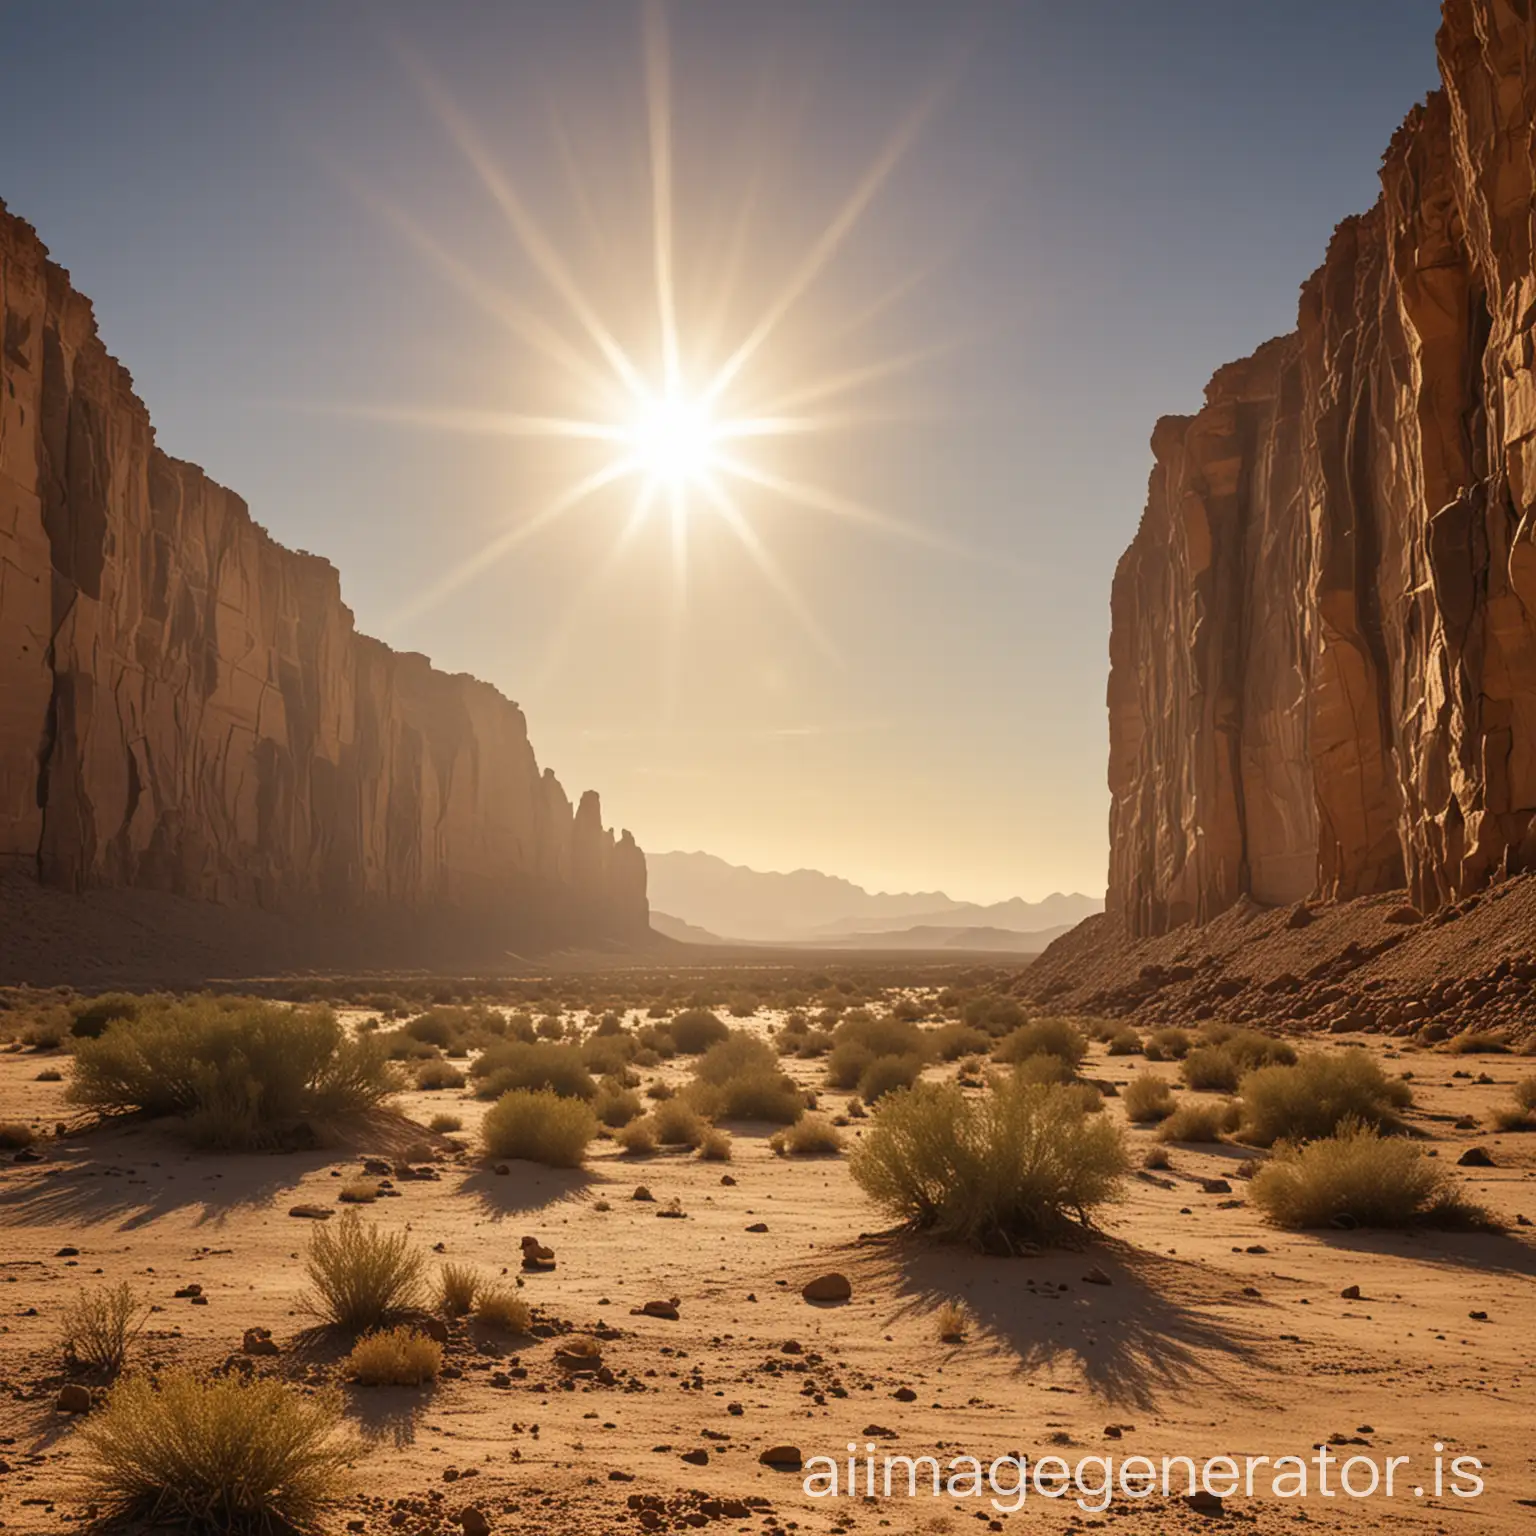 Desert scene with large cliff in the background and 2 suns in the sky.